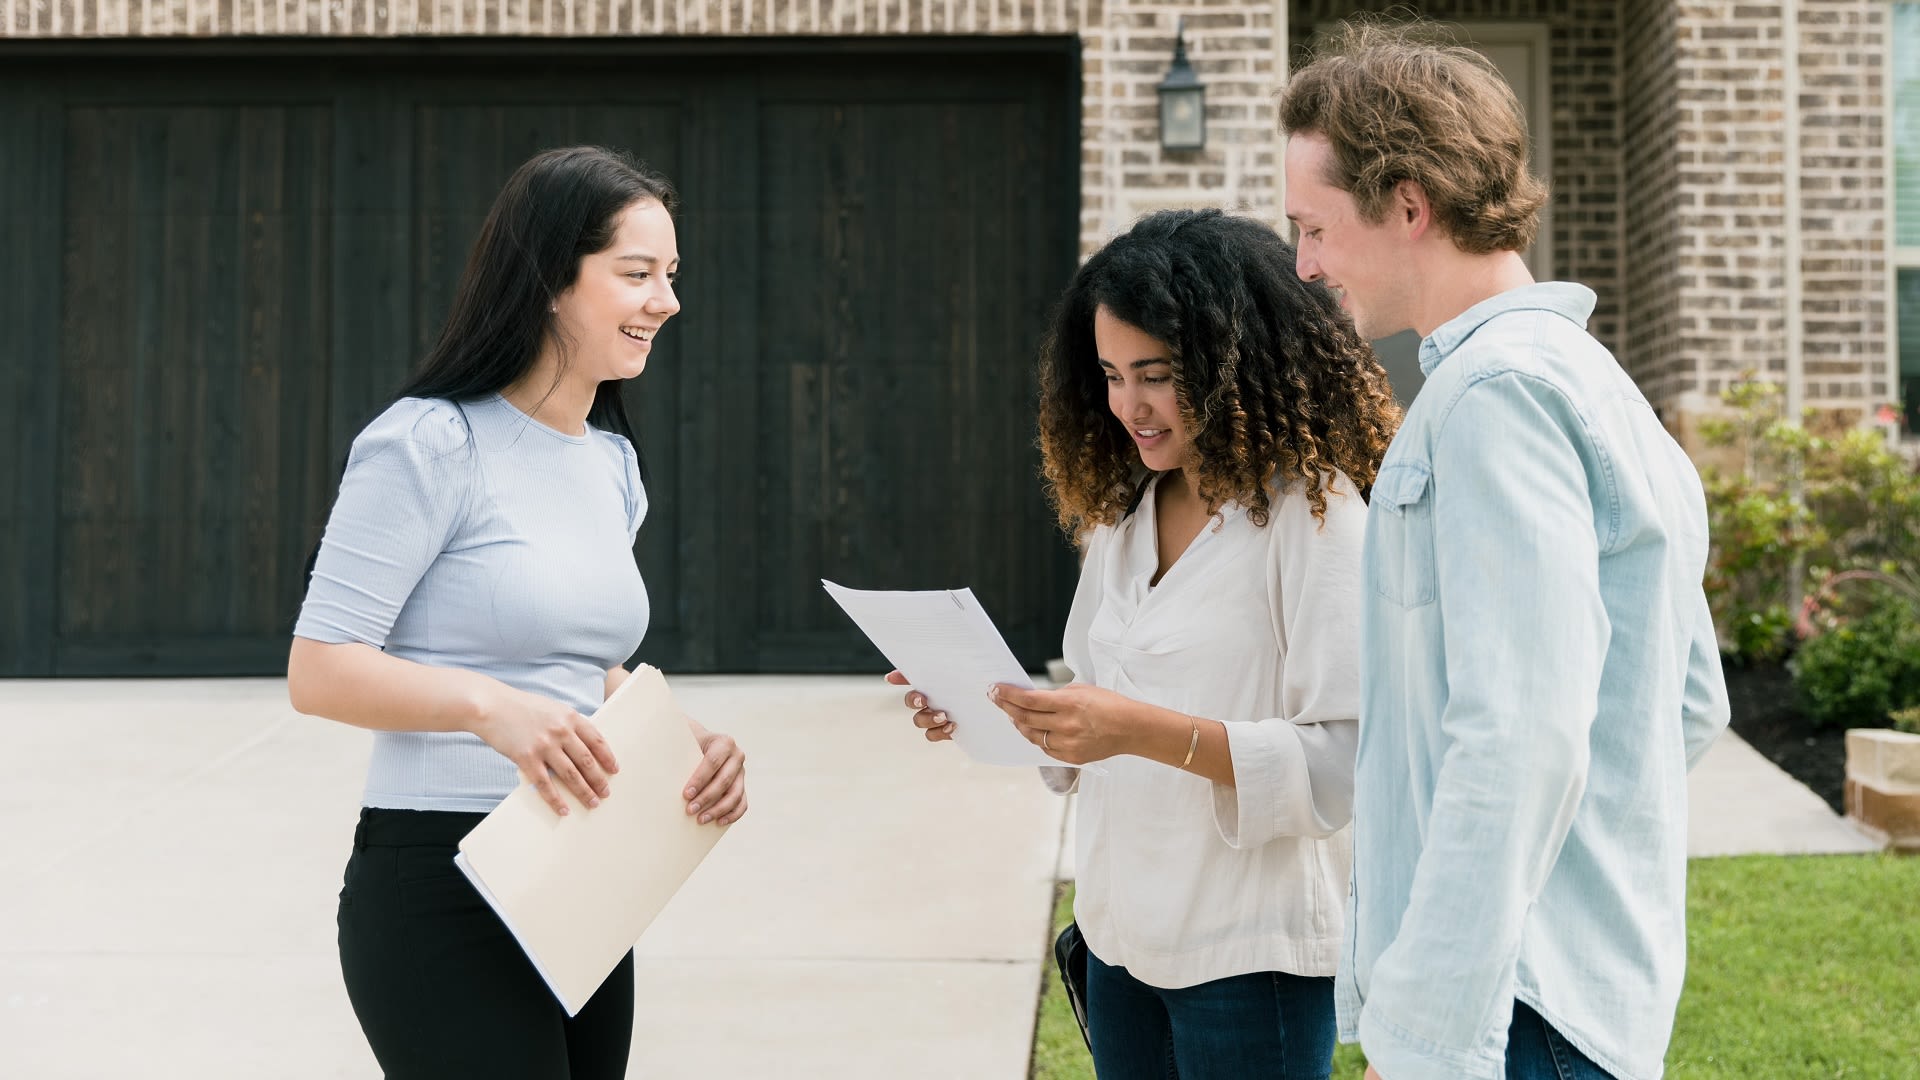 How Gen Z’s Approach to Real Estate Could Impact the Housing Market